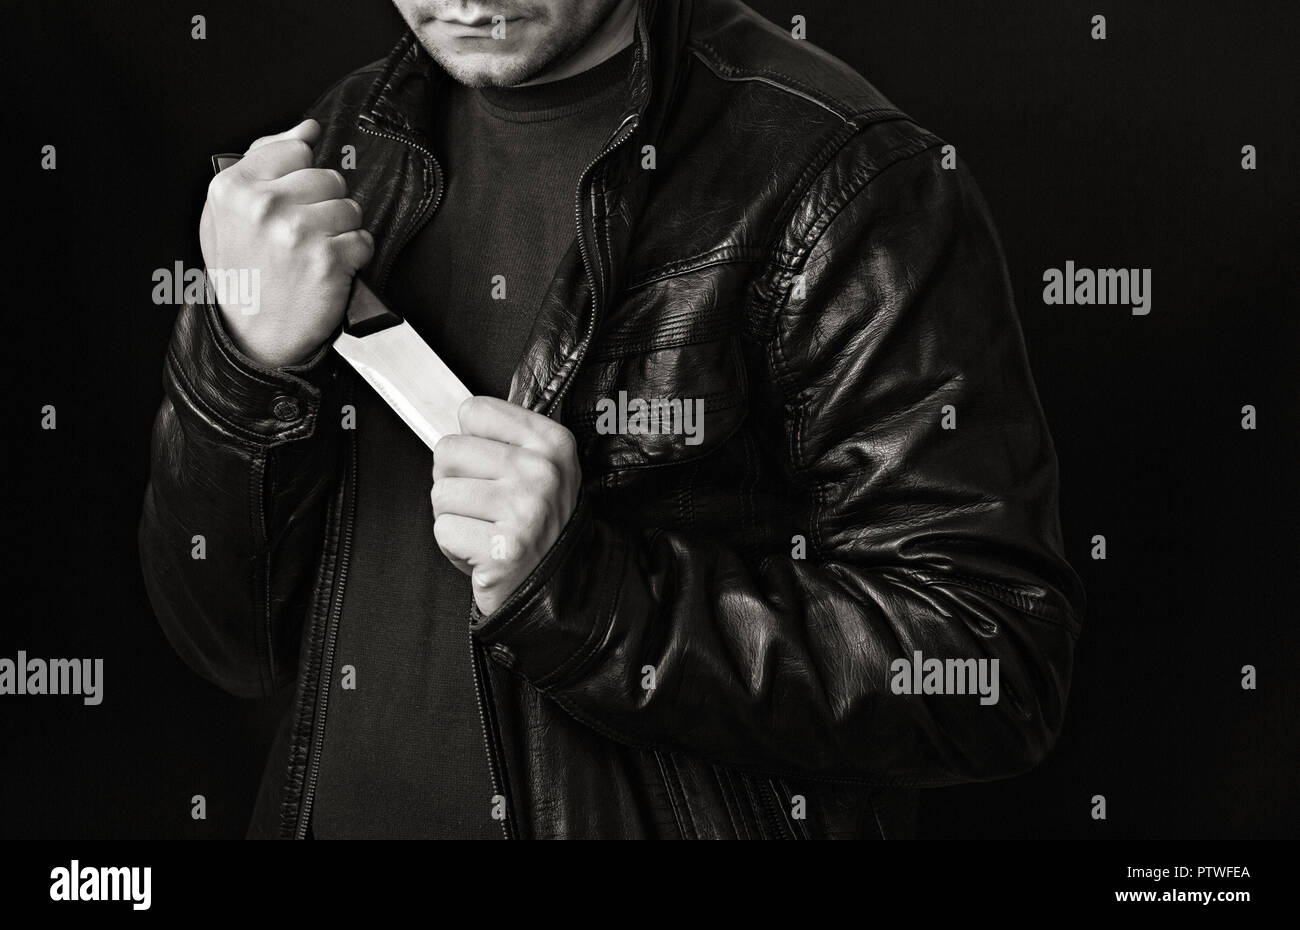 A man takes a knife out of a jacket, a black background, black and white Stock Photo